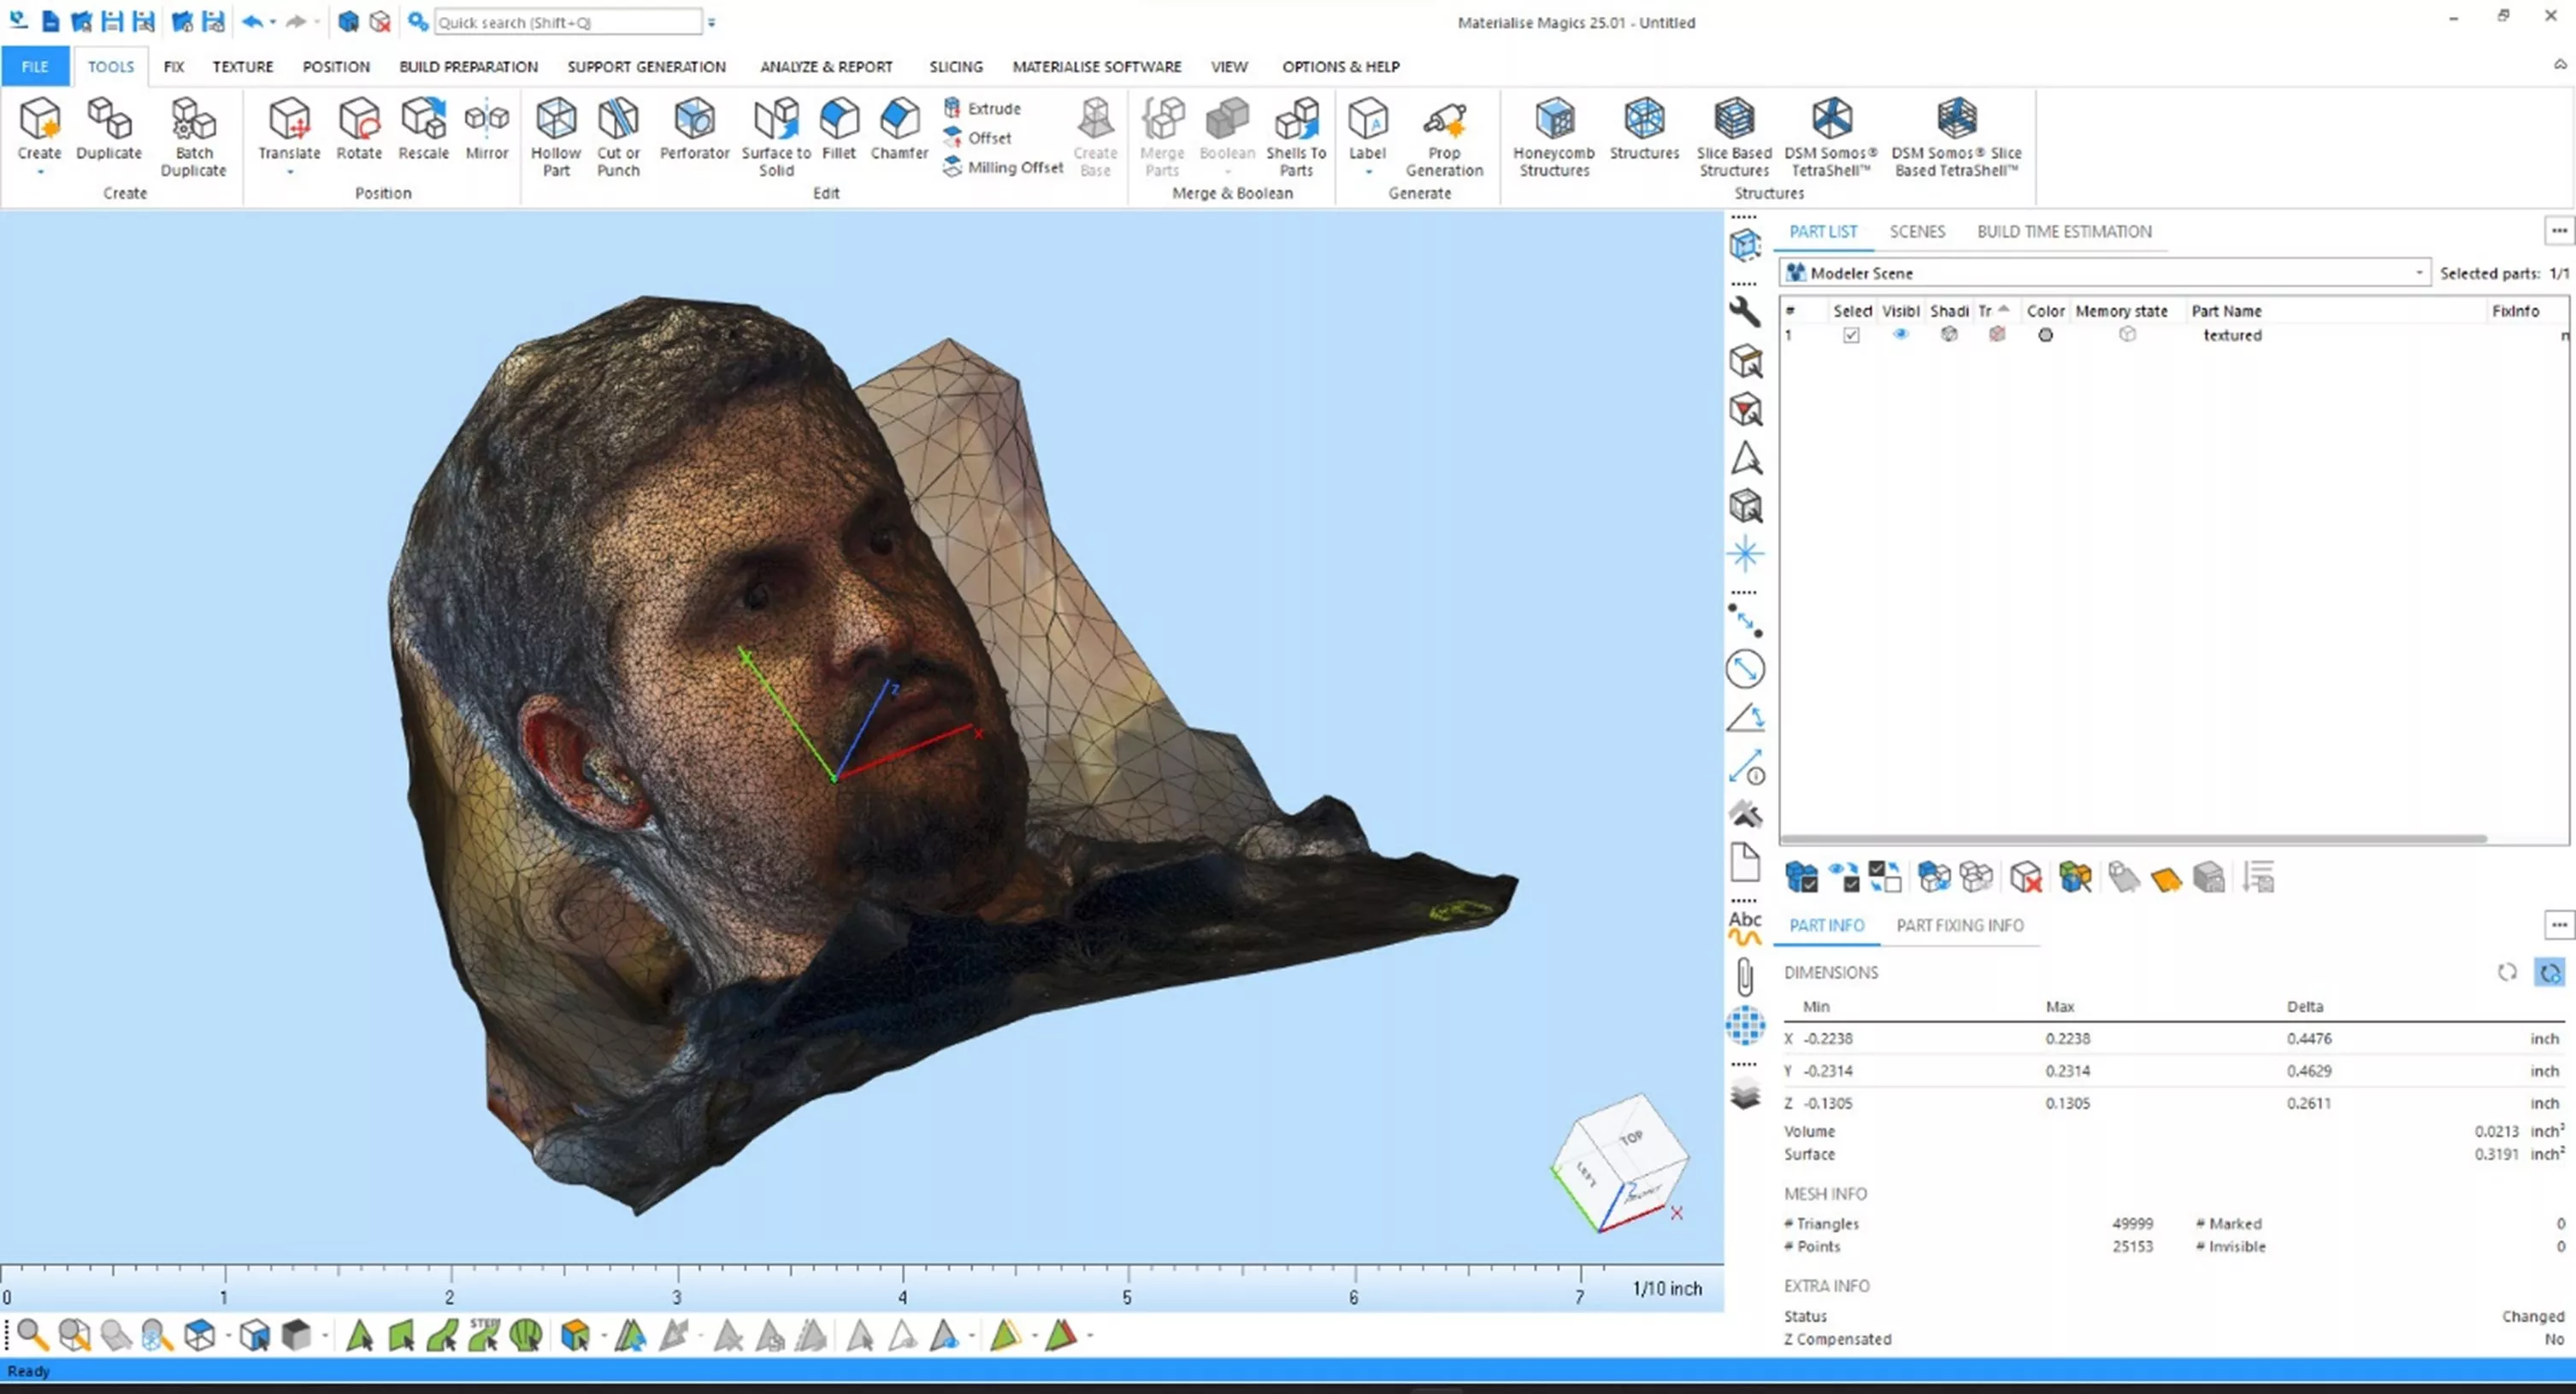 3D Scanned Human Face Displayed in Materialise Magics 3D Printing Software